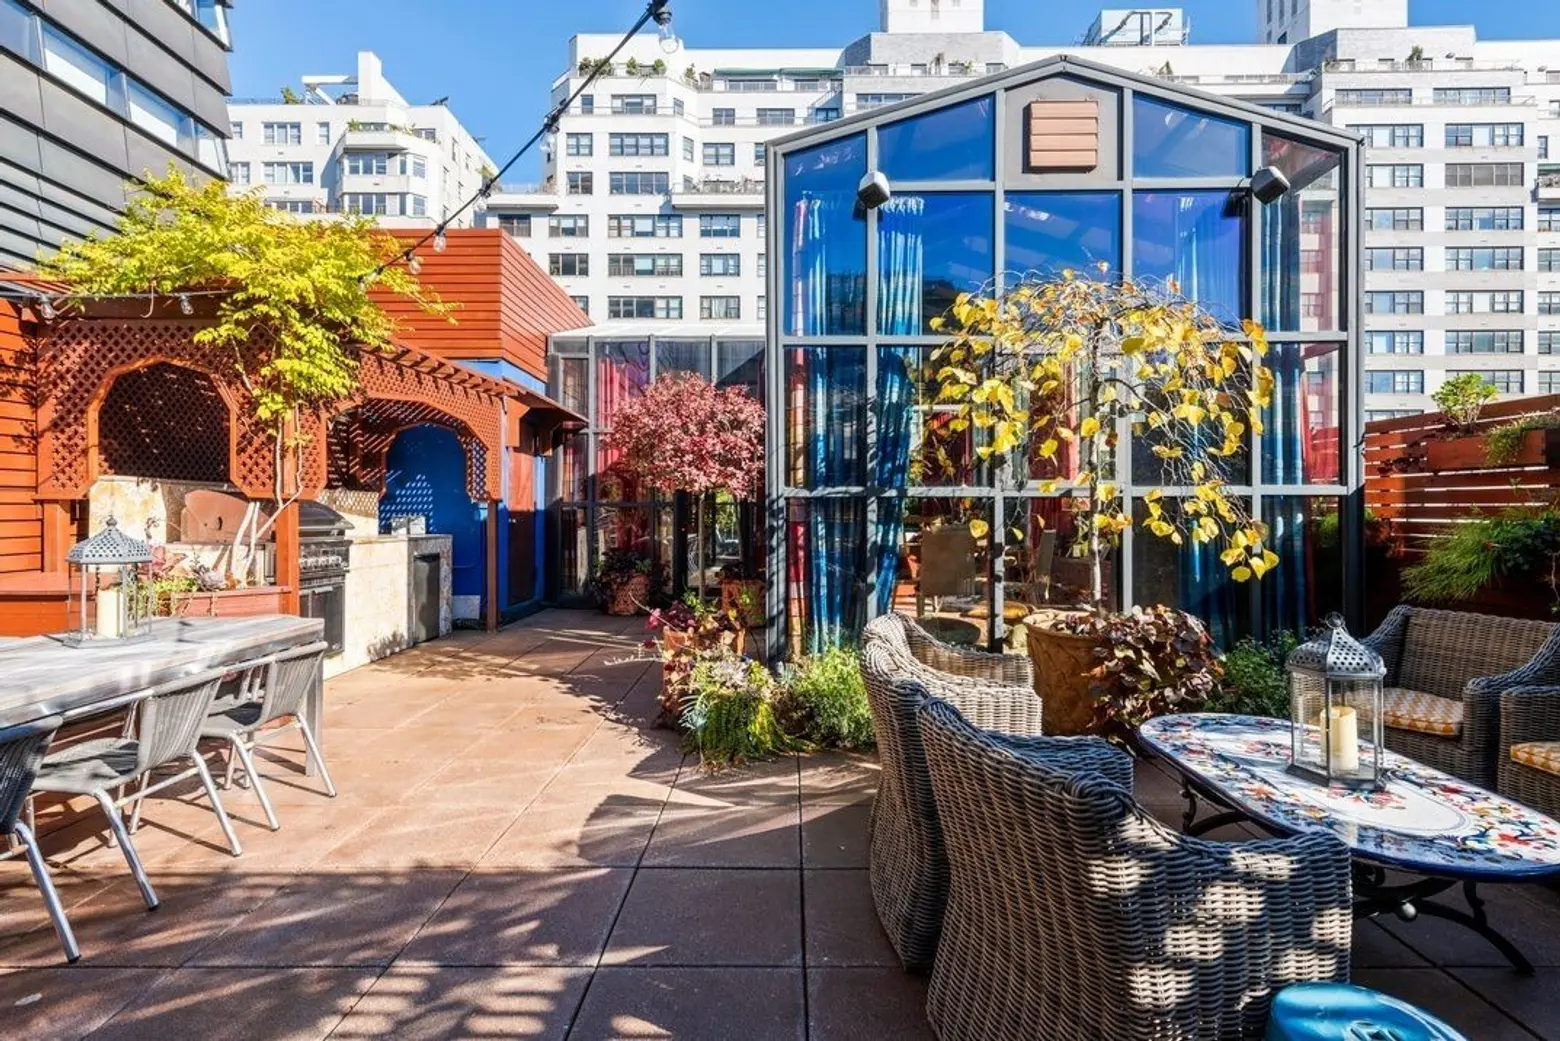 Quirky Union Square artist's loft with a massive skylight and floating  library cube asks $4M